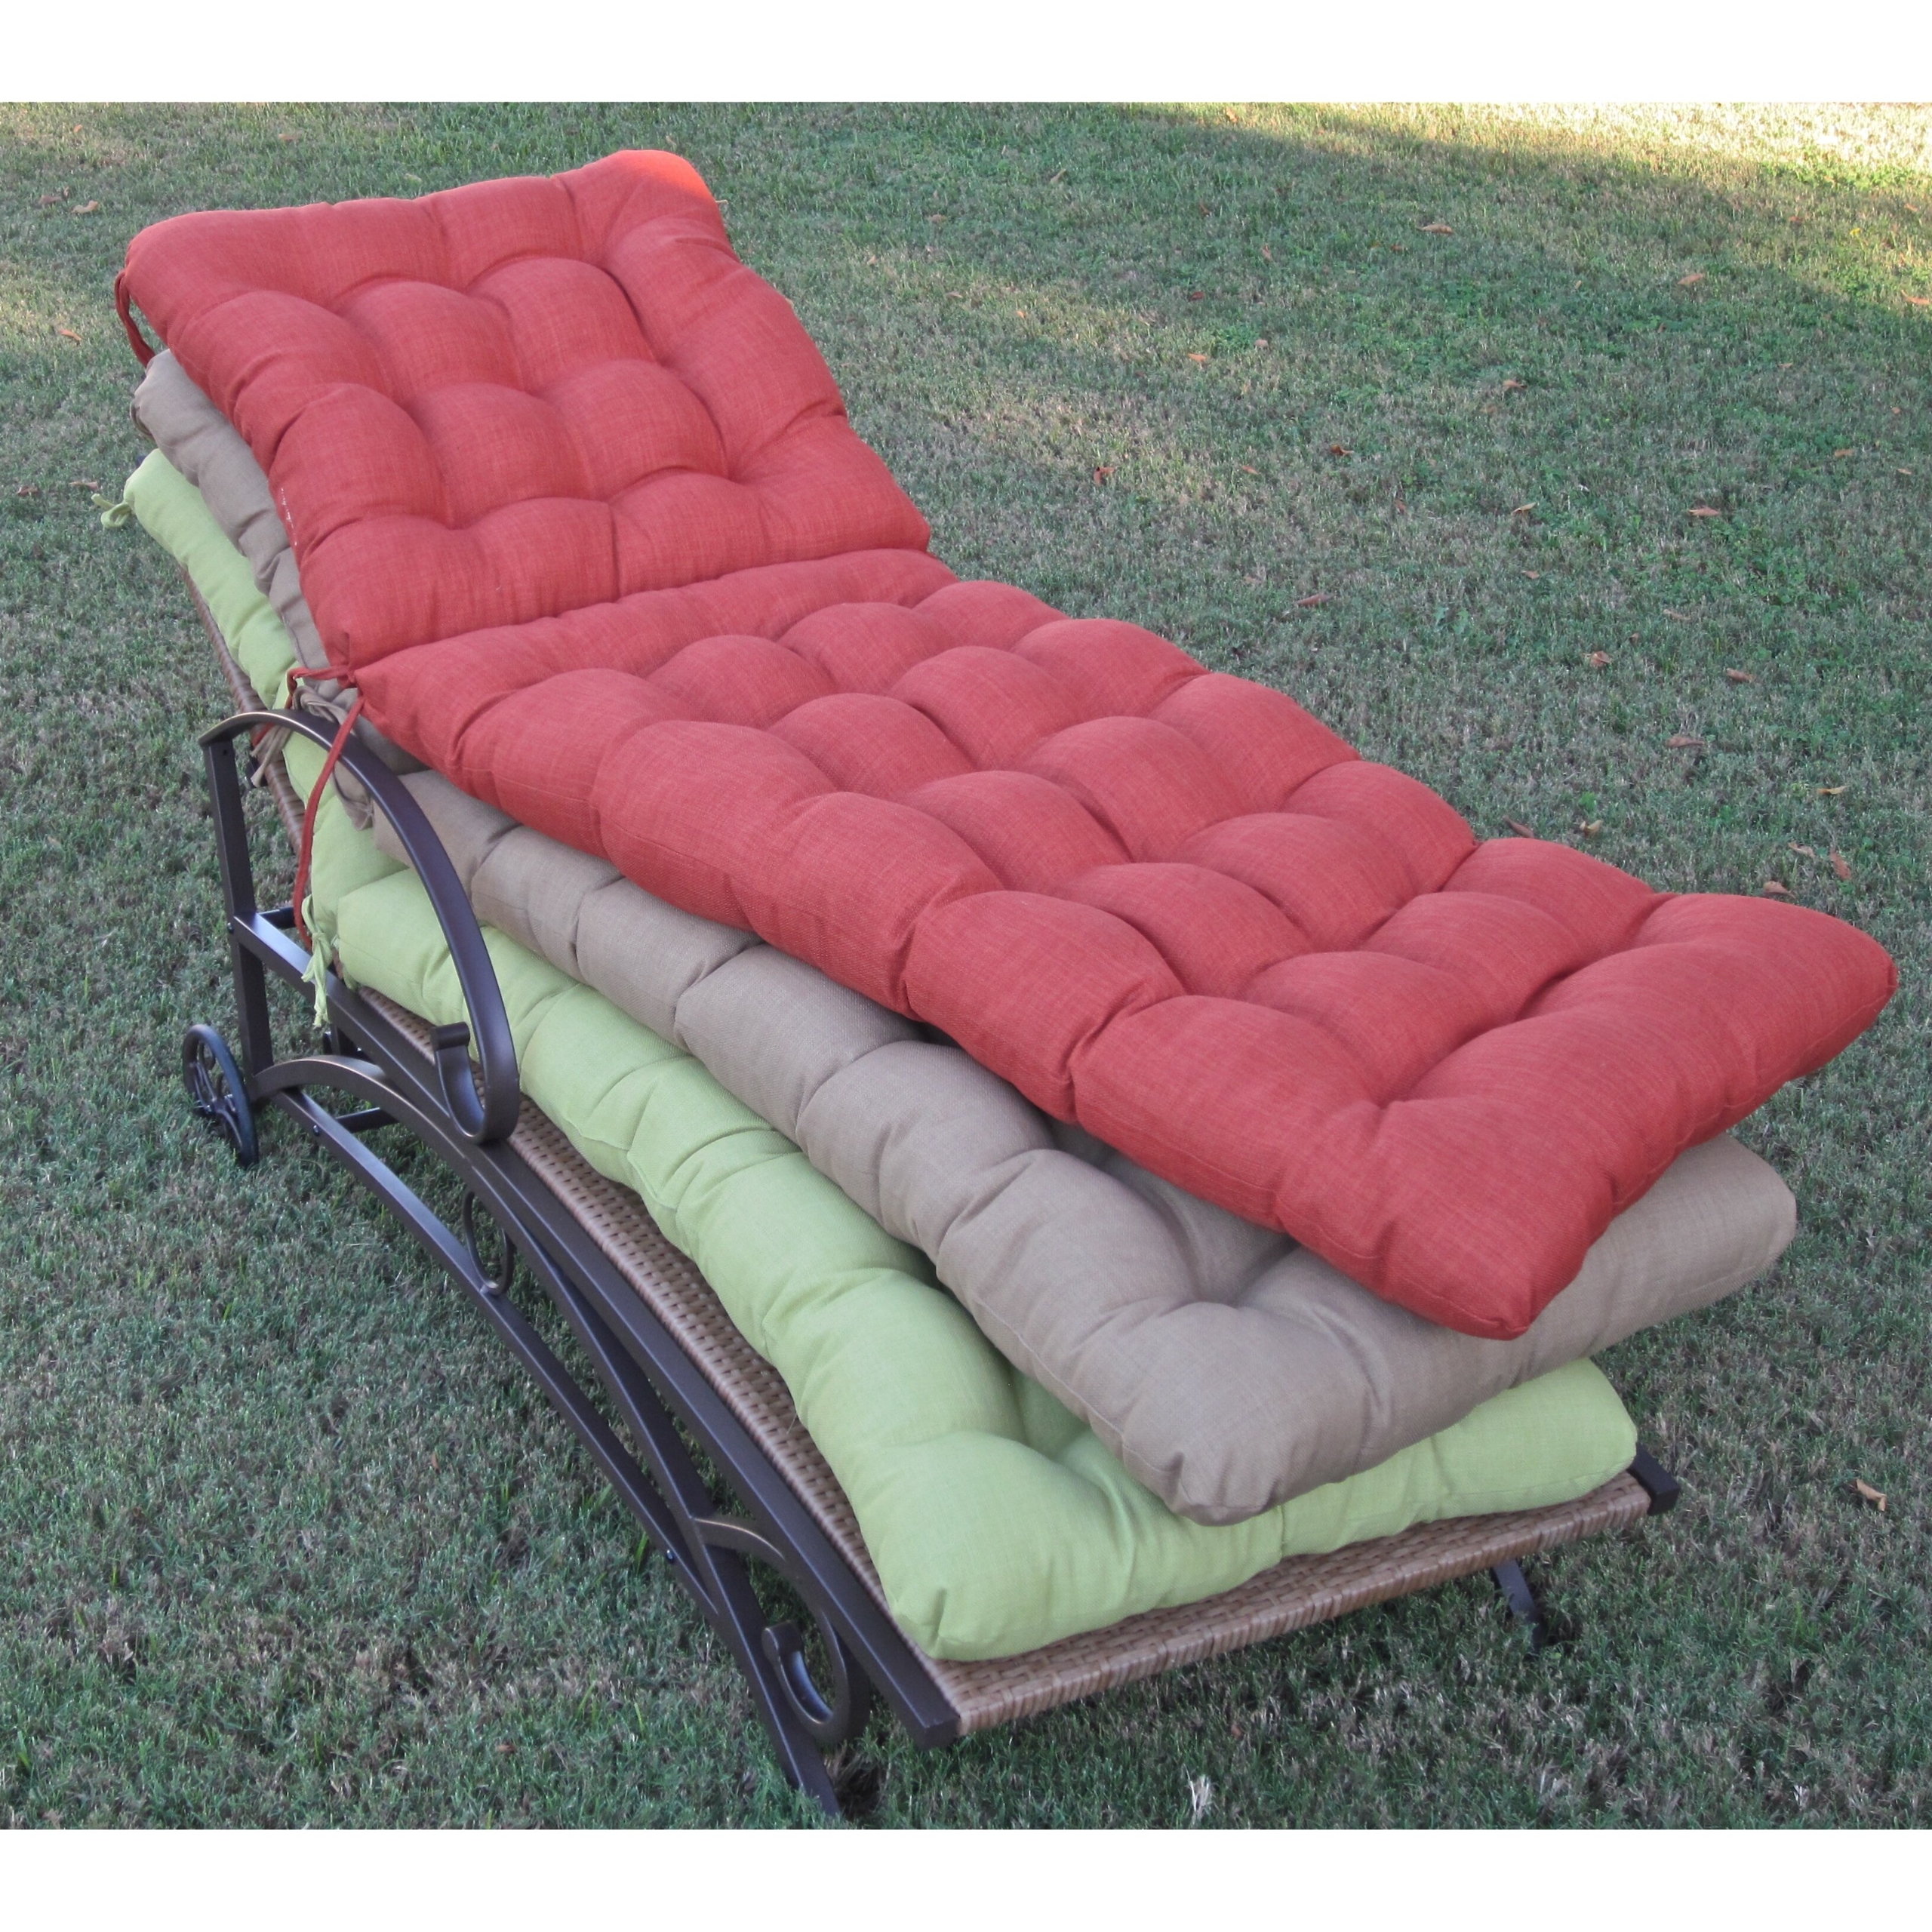 All-Weather UV-Resistant Tufted Patio Chaise Lounge Cushion